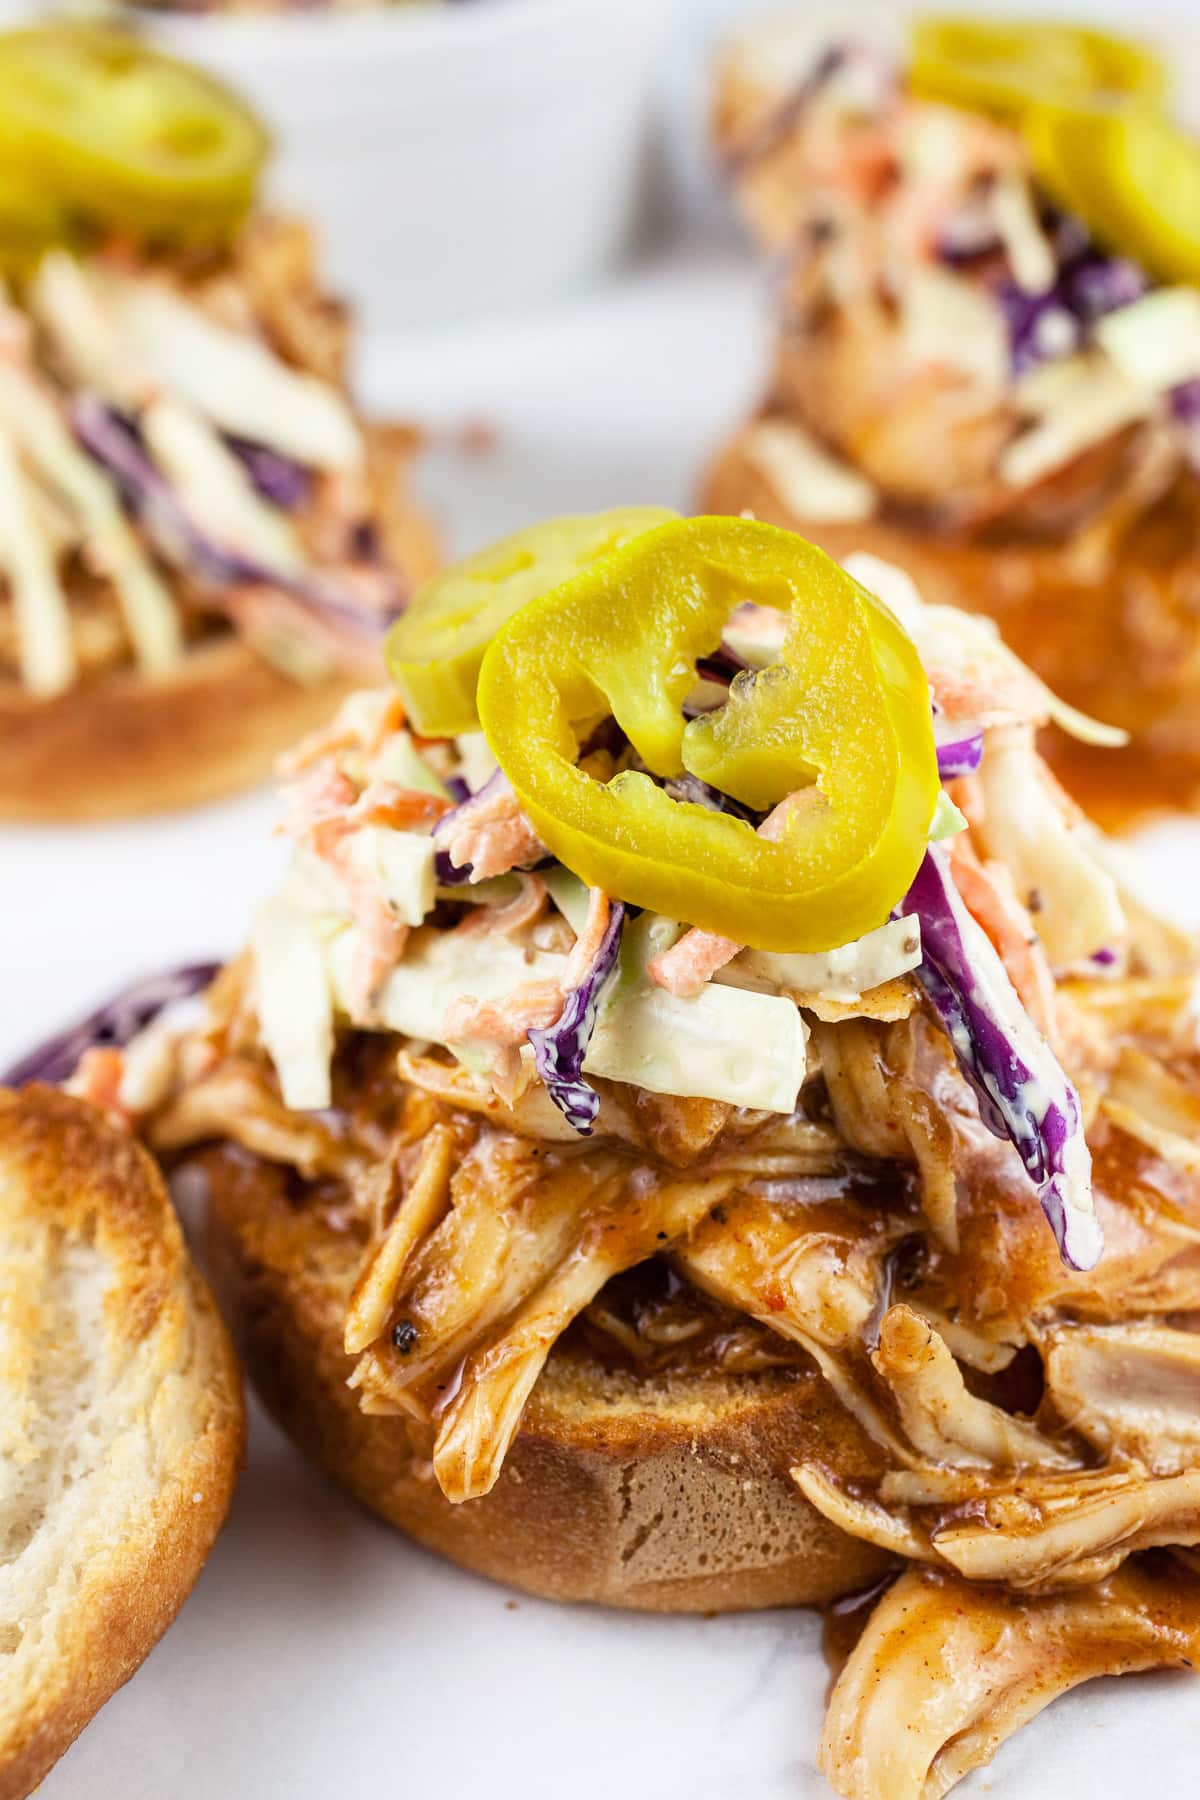 Open faced BBQ chicken sandwiches with coleslaw and pickled jalapenos on toasted buns.